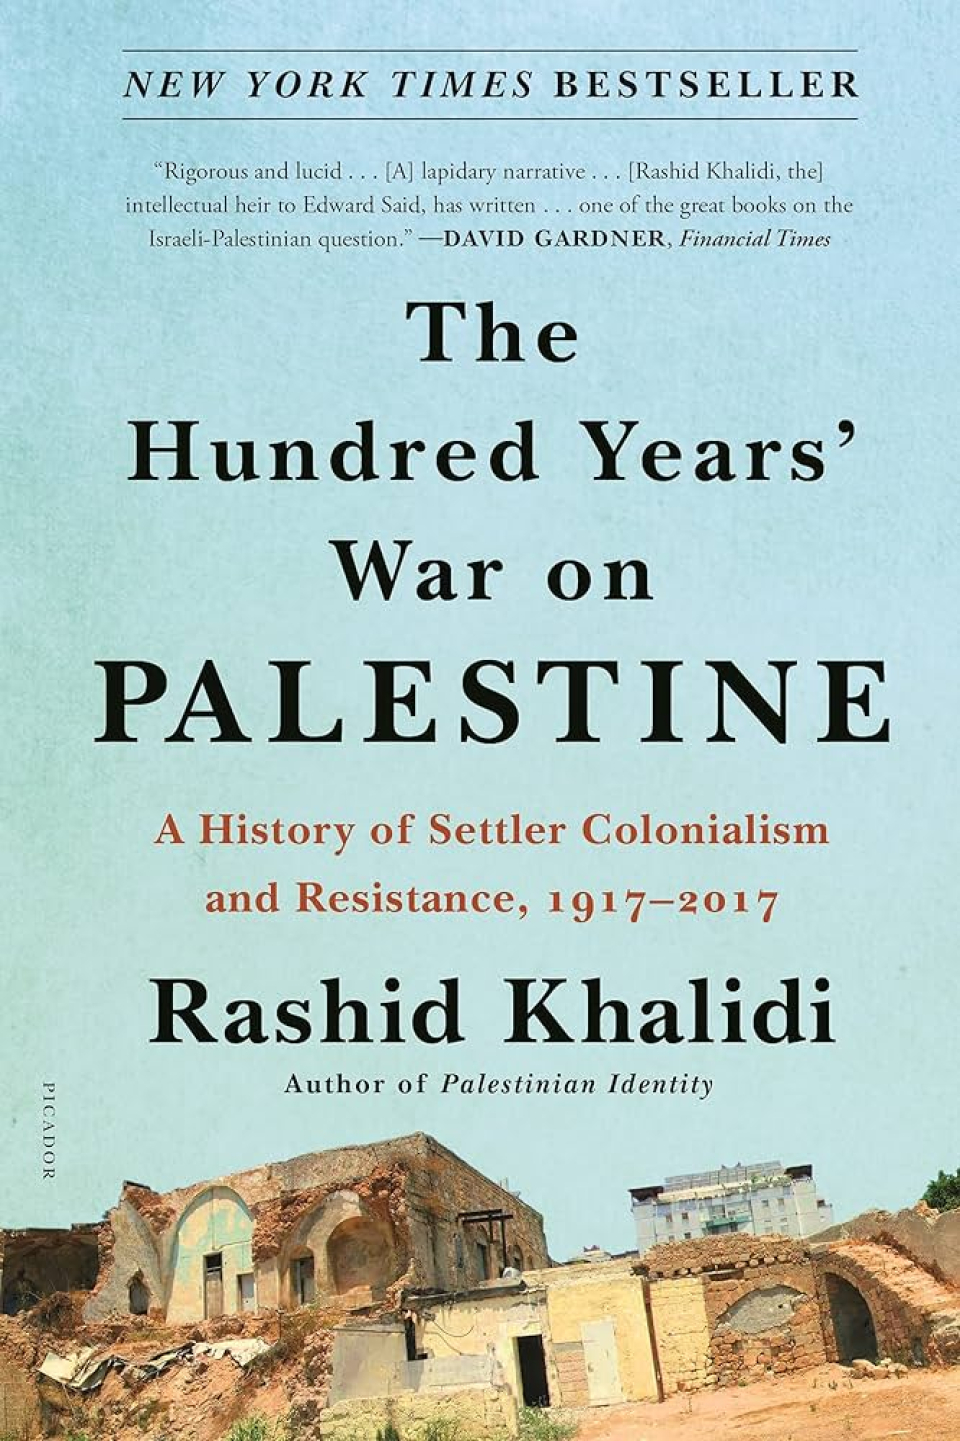 Book: Hundred Years' War on Palestine